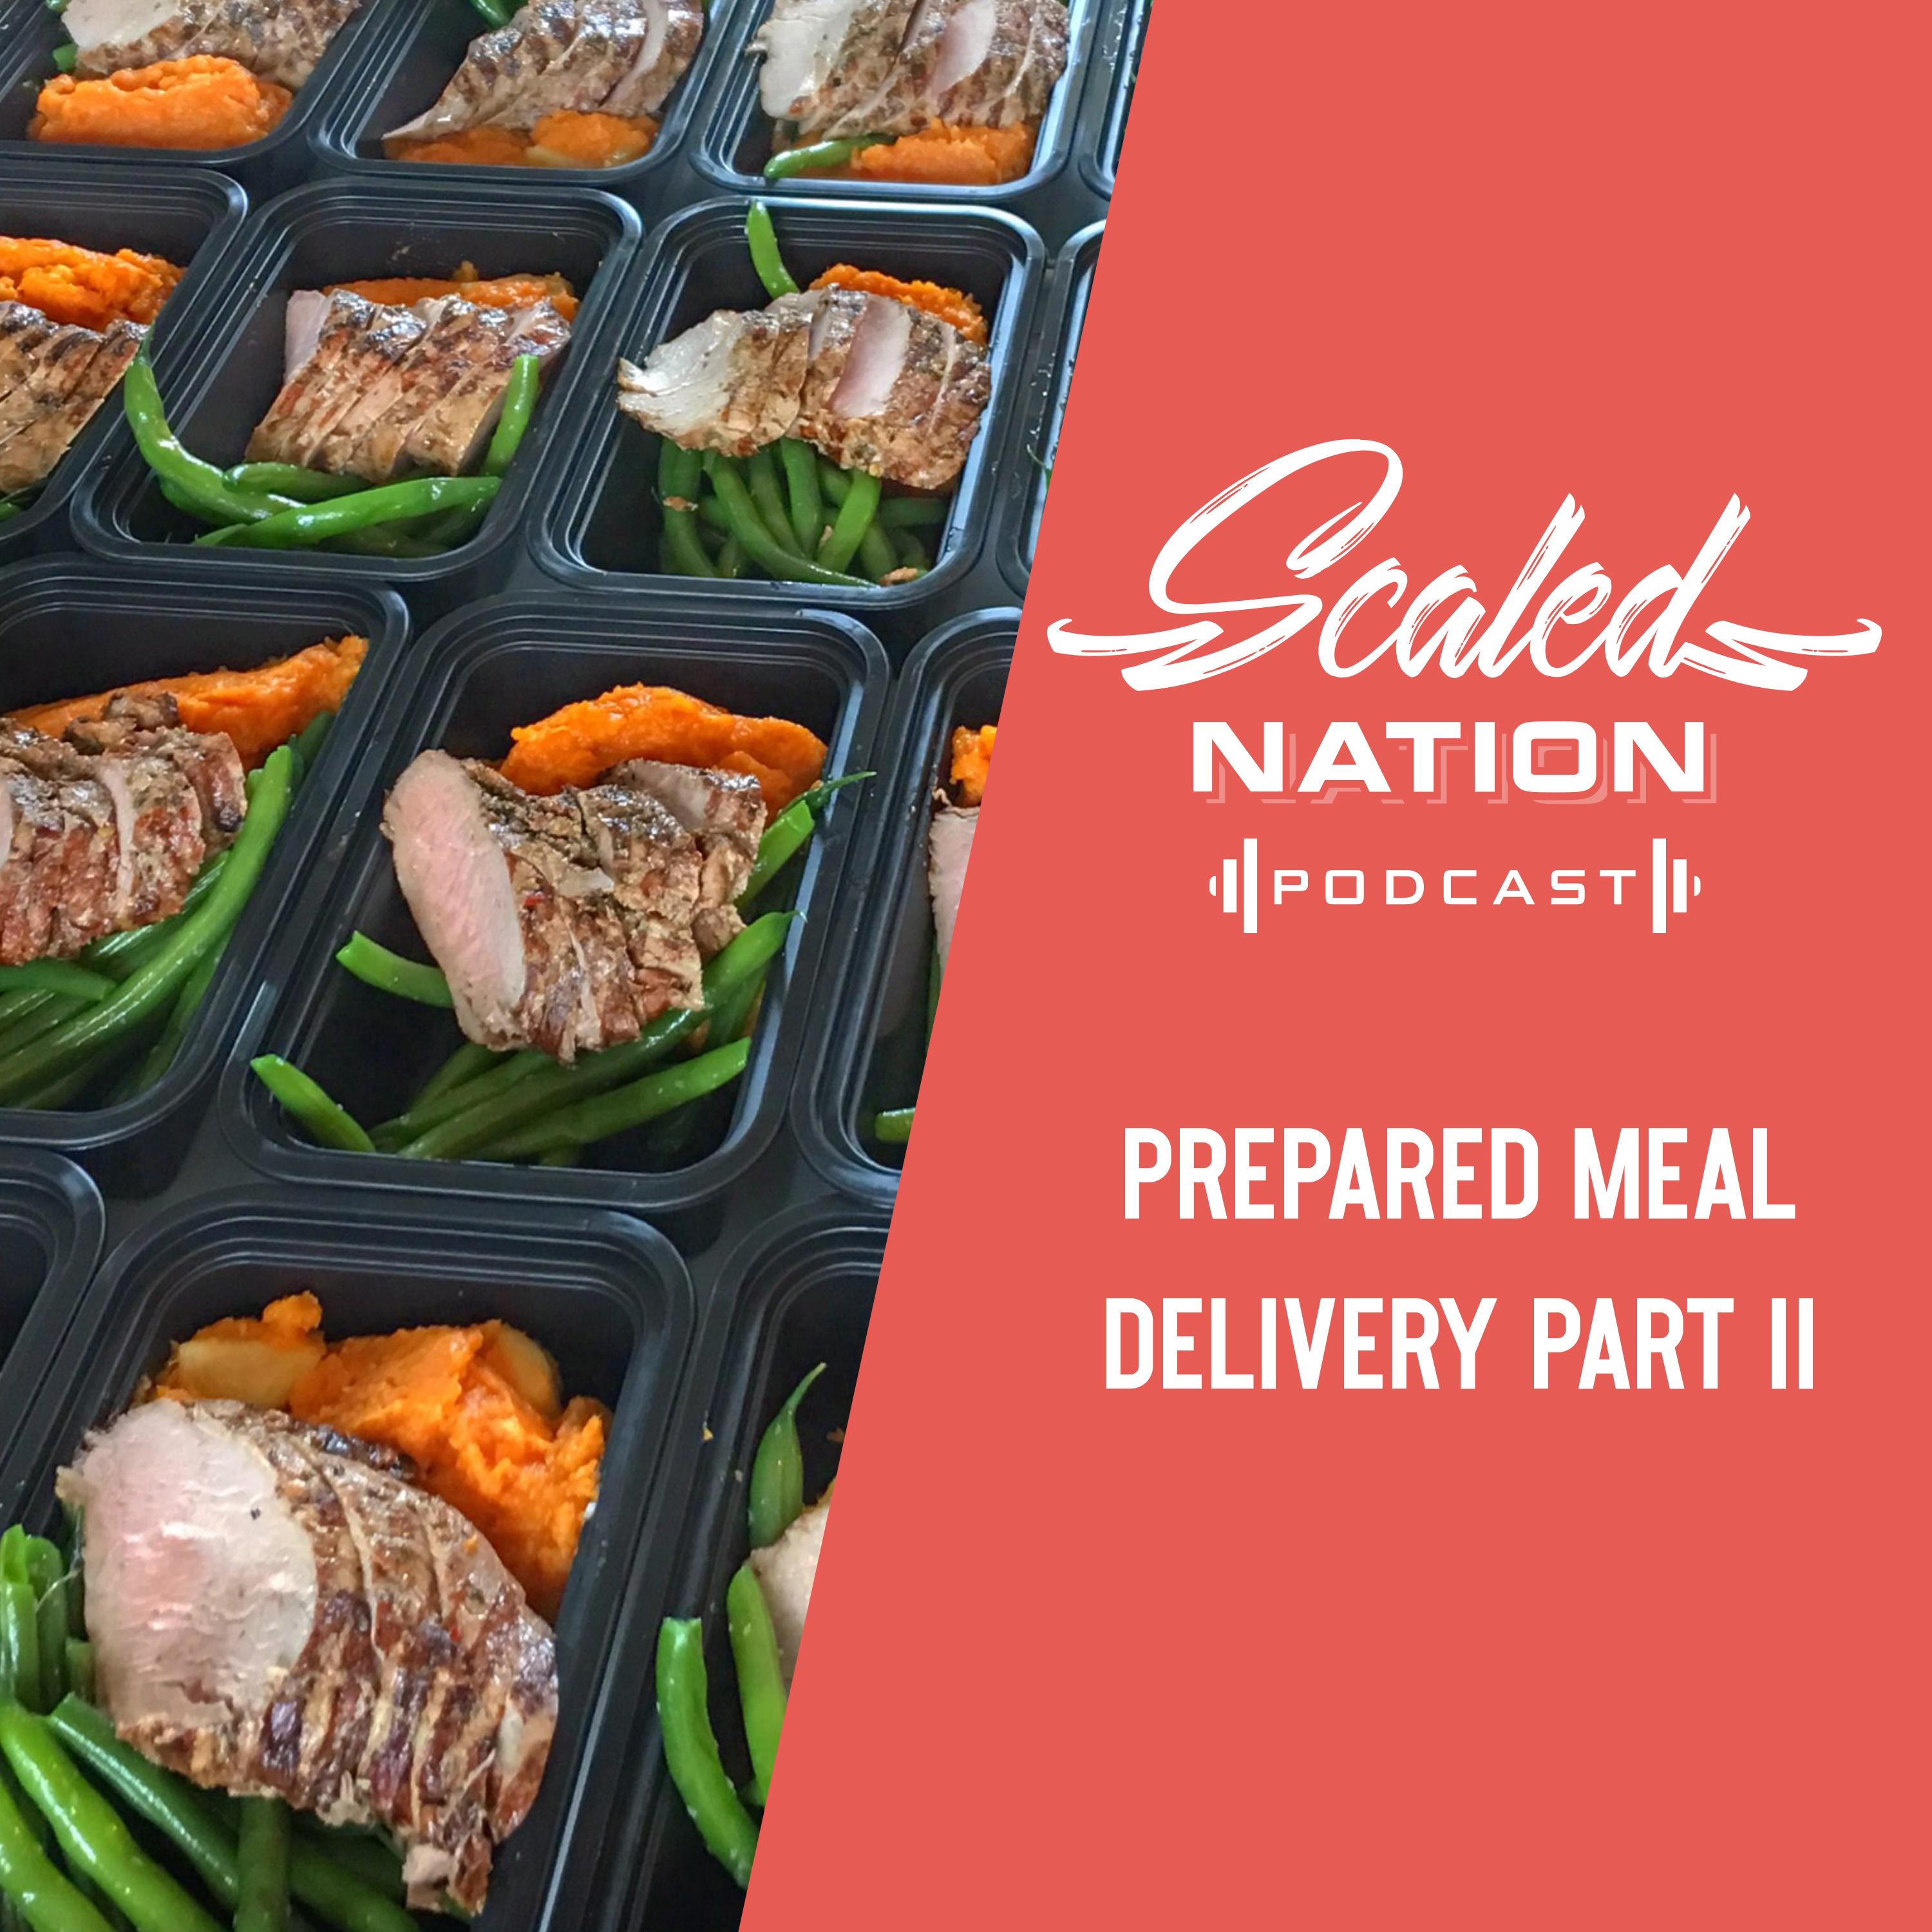 prepared meal delivery services part two podcast